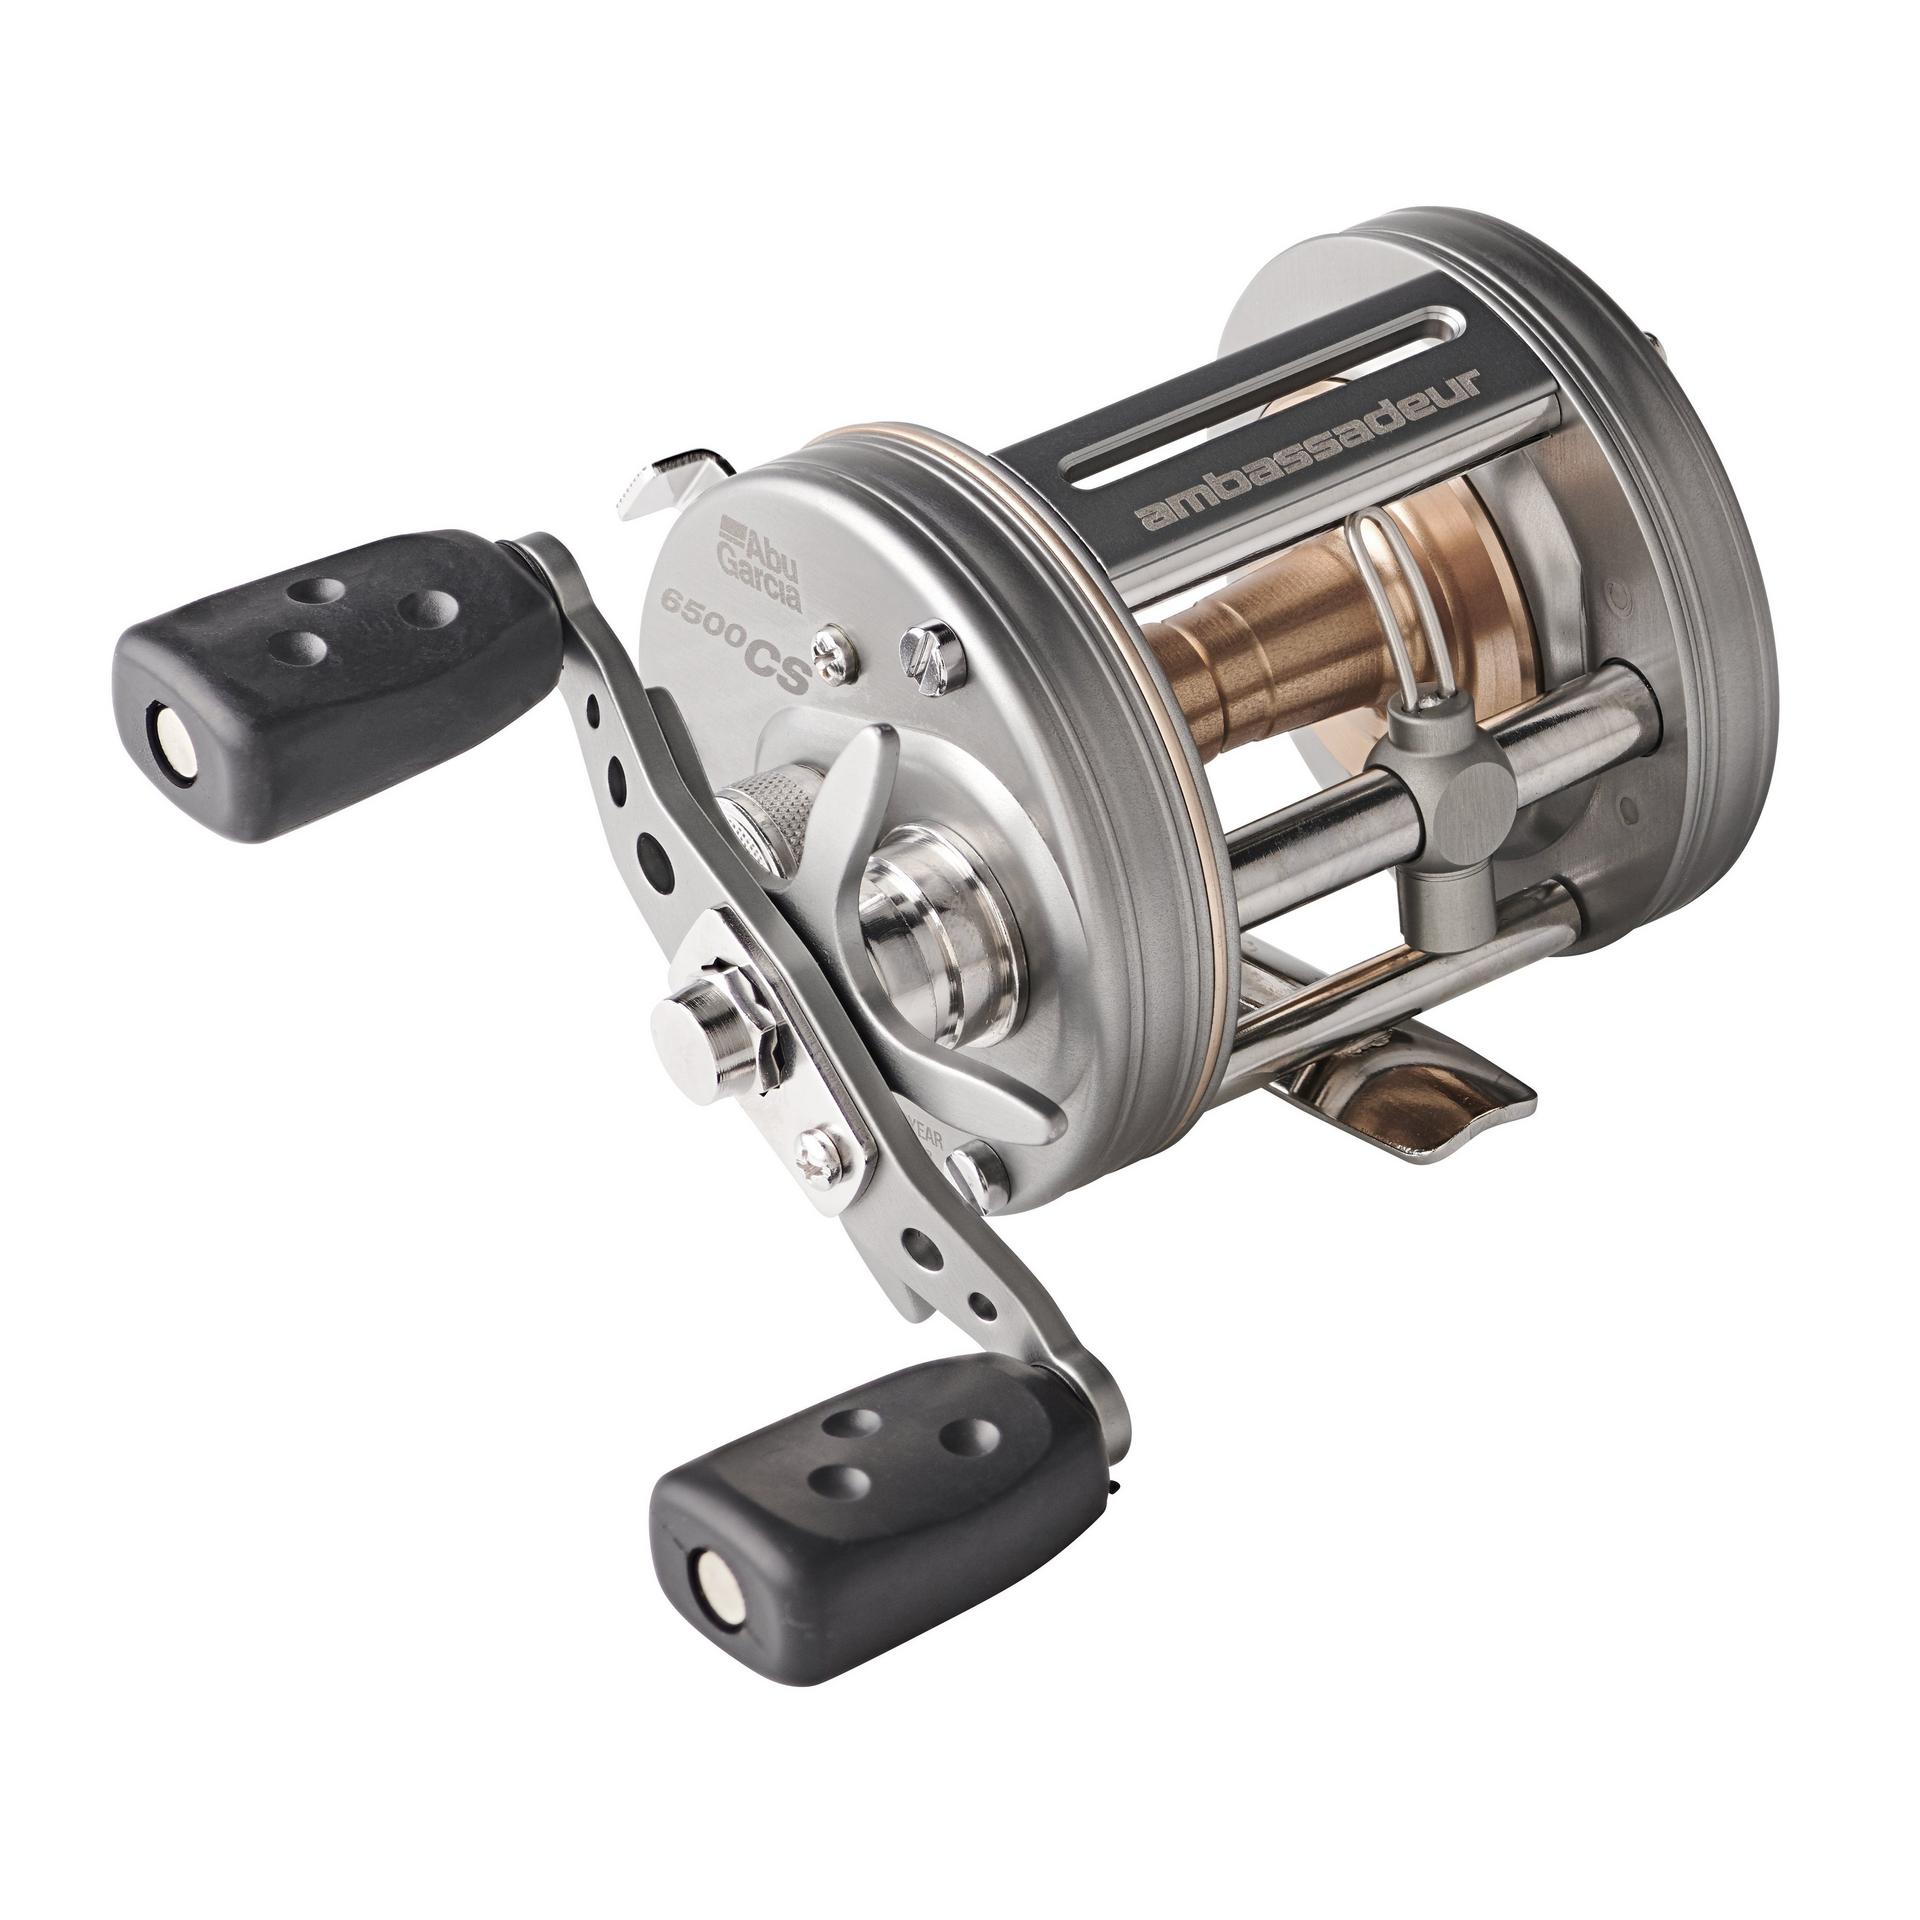 Abu Garcia Ambassadeur S Round Baitcast Fishing Reel , Up to $8.20 Off with  Free S&H — CampSaver